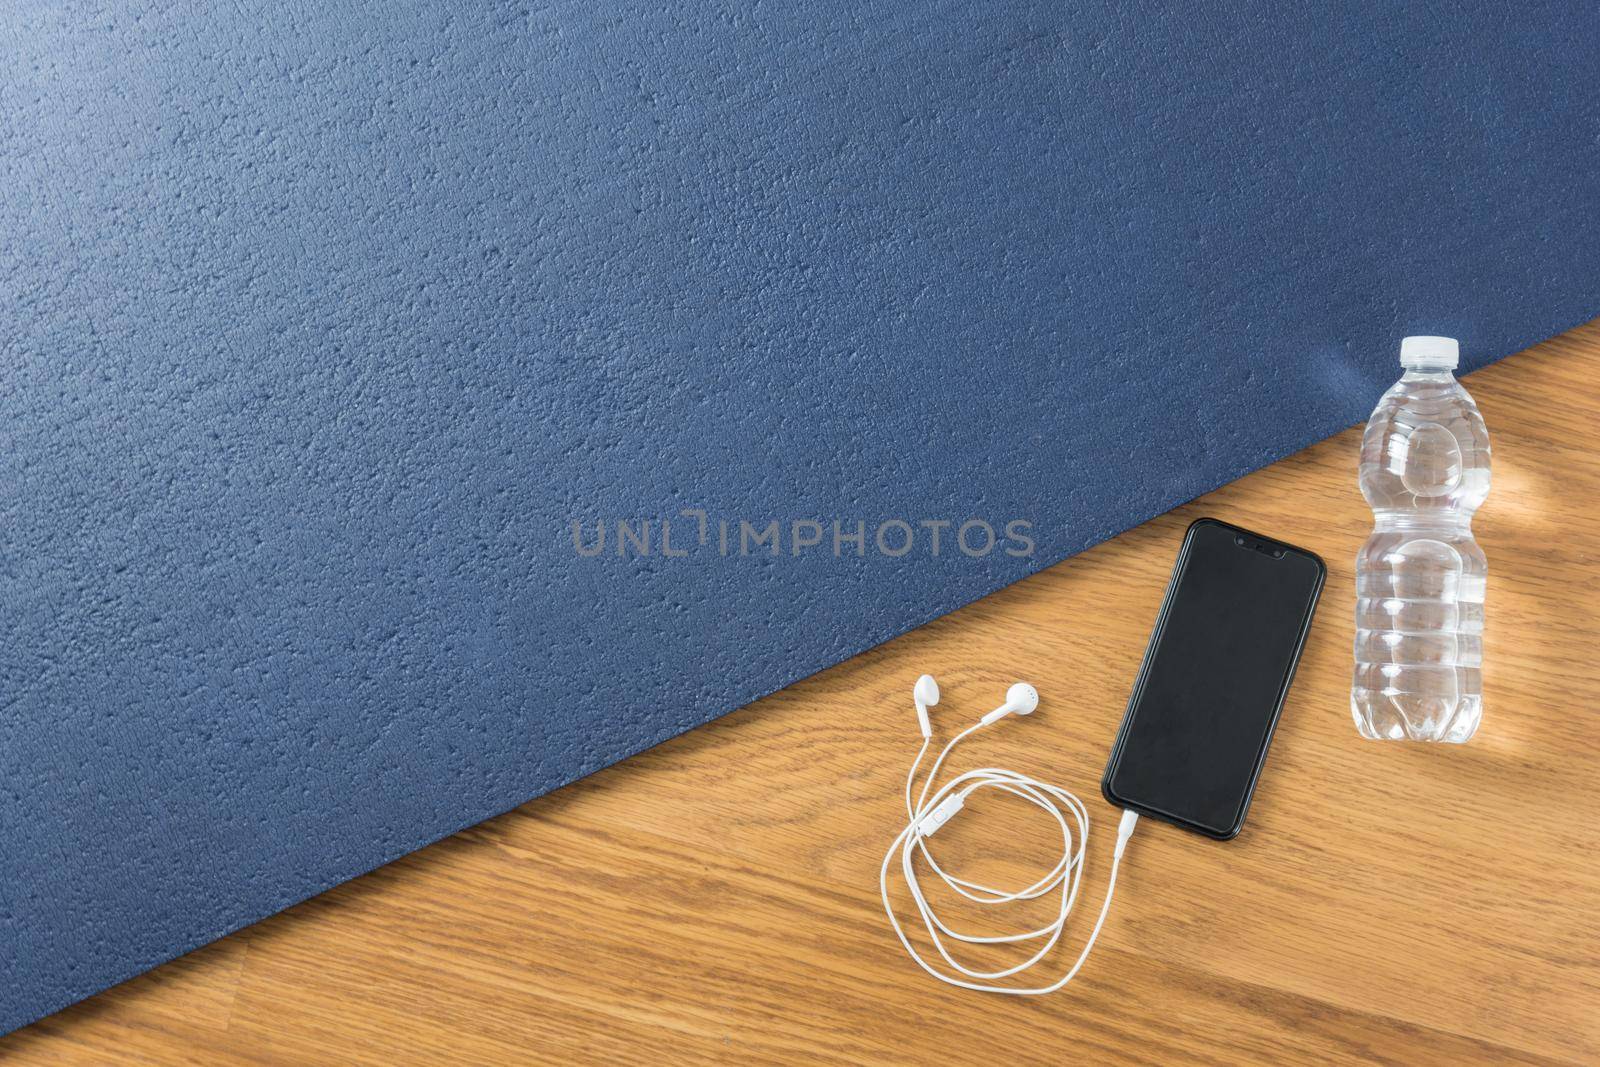 Image from above blue exercise mat at home with smartphone water bottle and white headphones on brown wooden floor